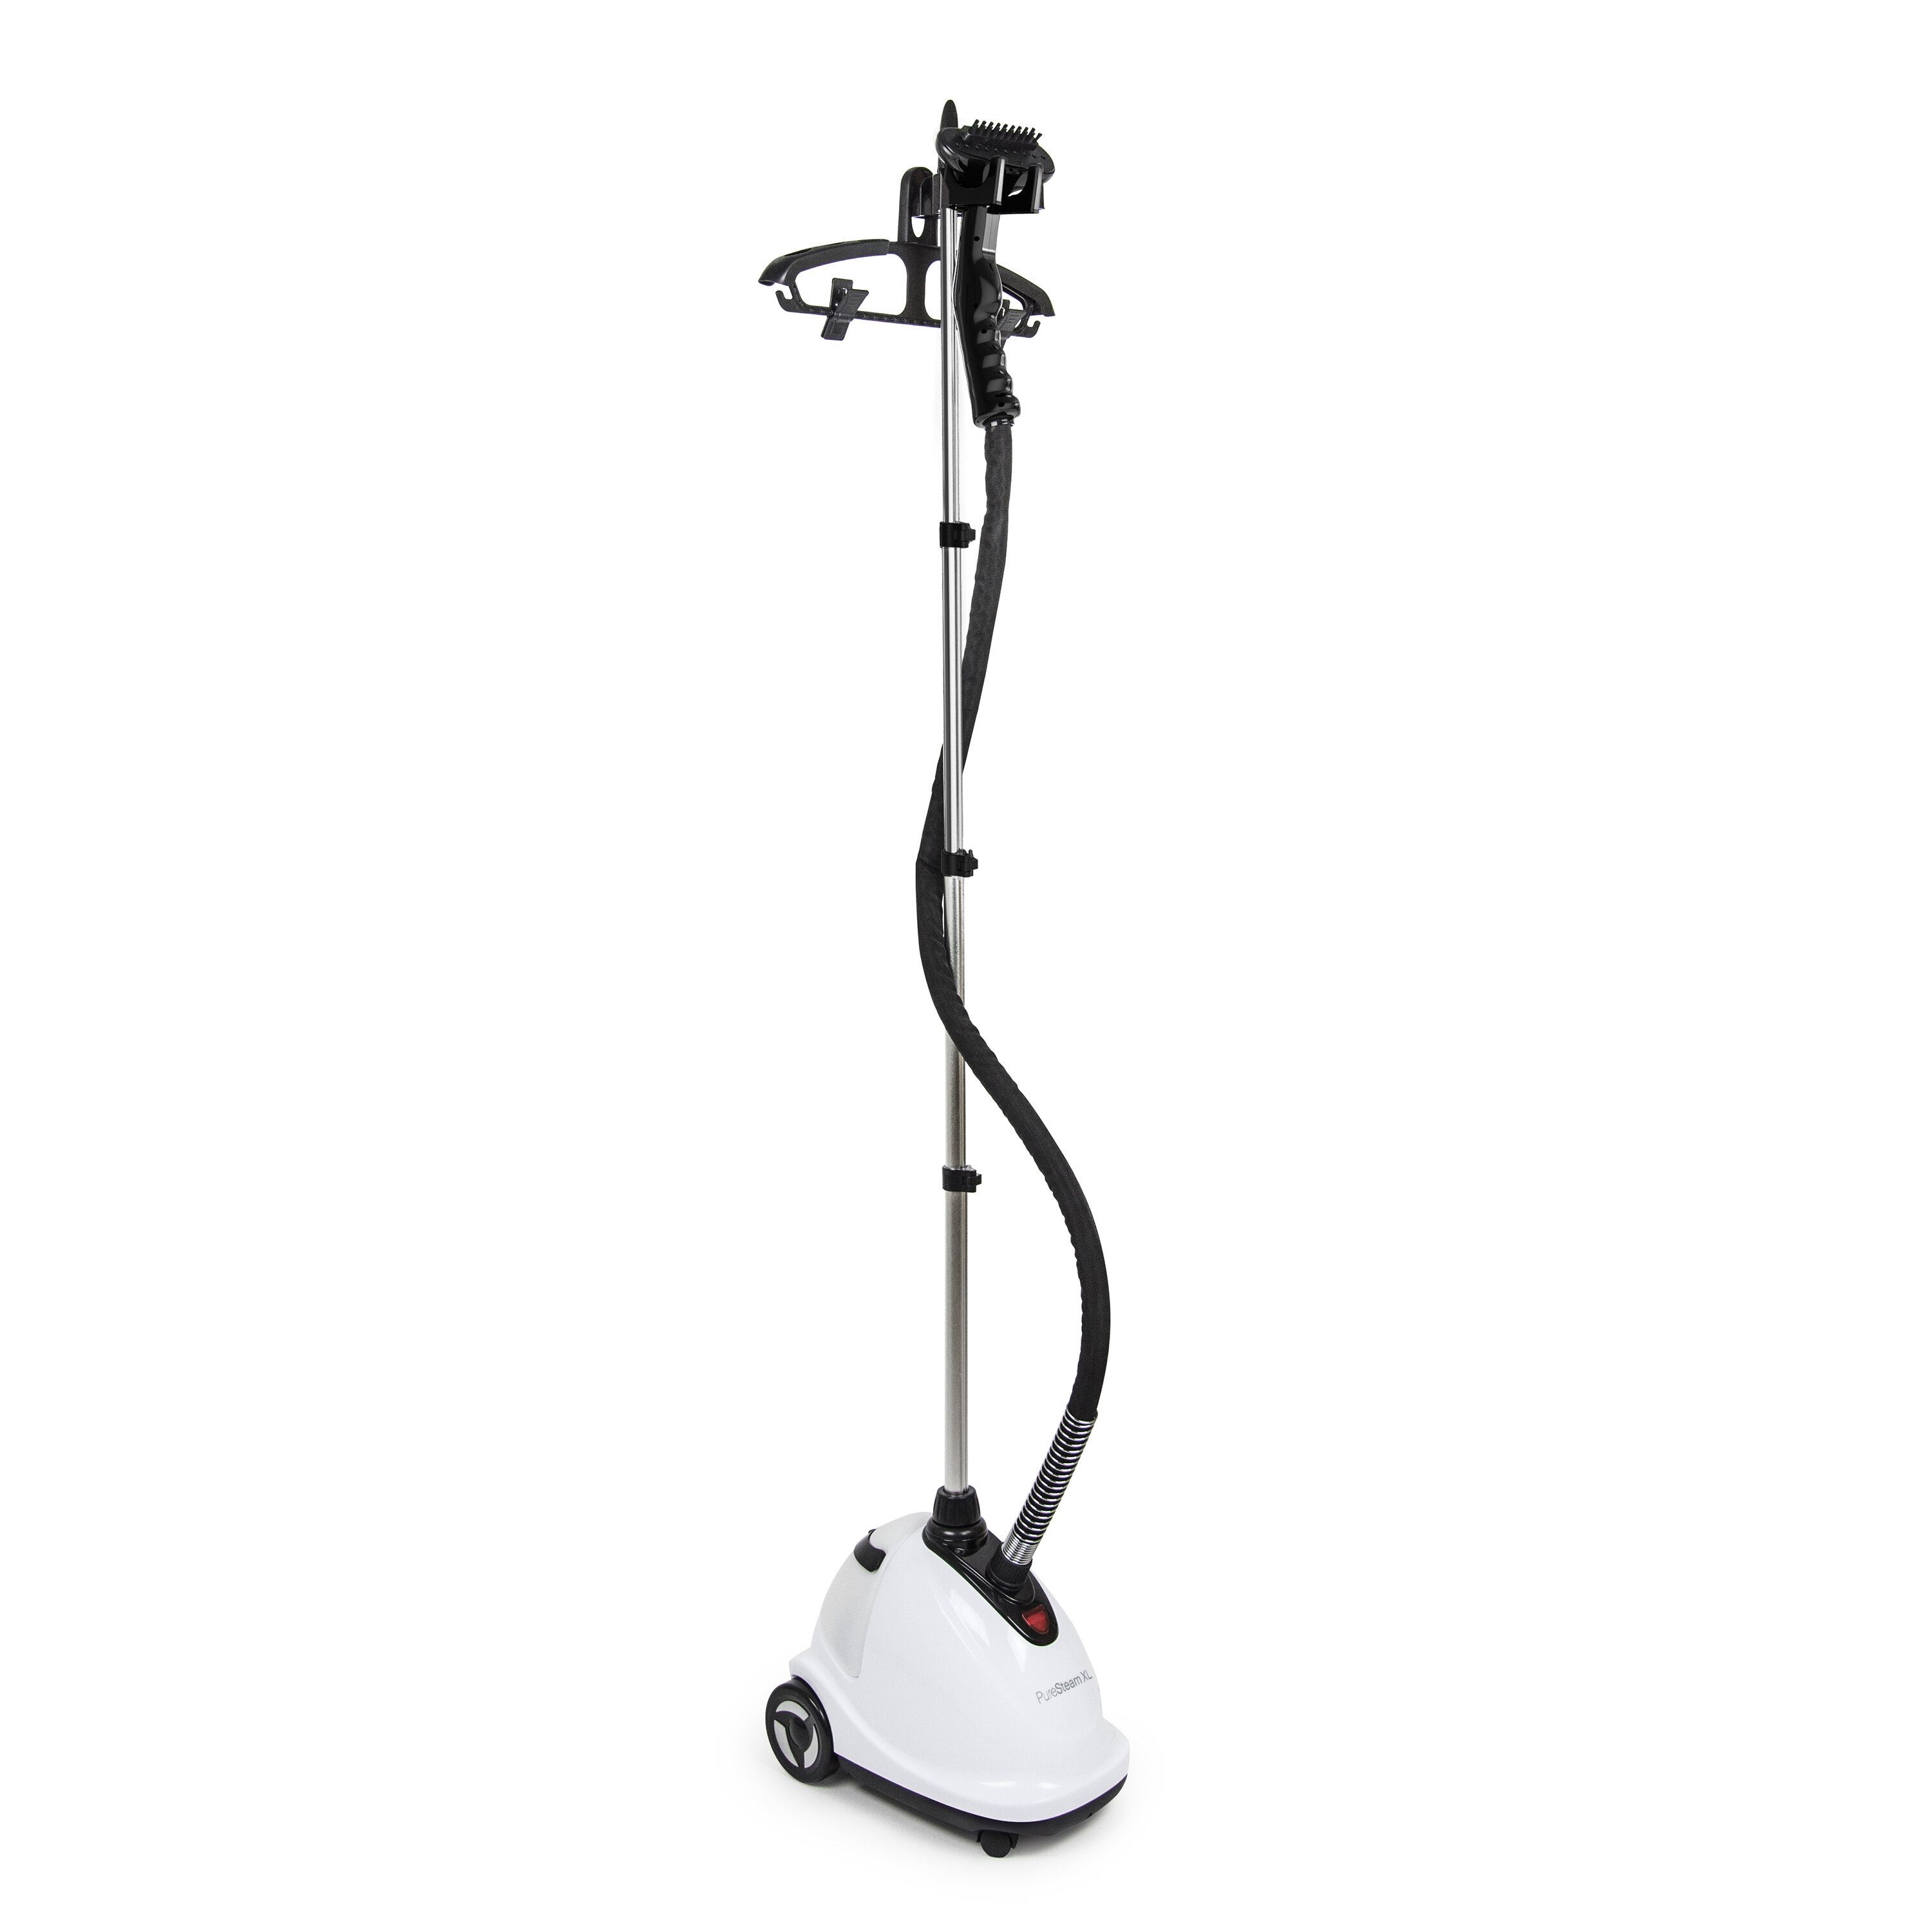 High-Powered Standing Fabric Steamer with Garment Hanger and Fabric Steamer. 